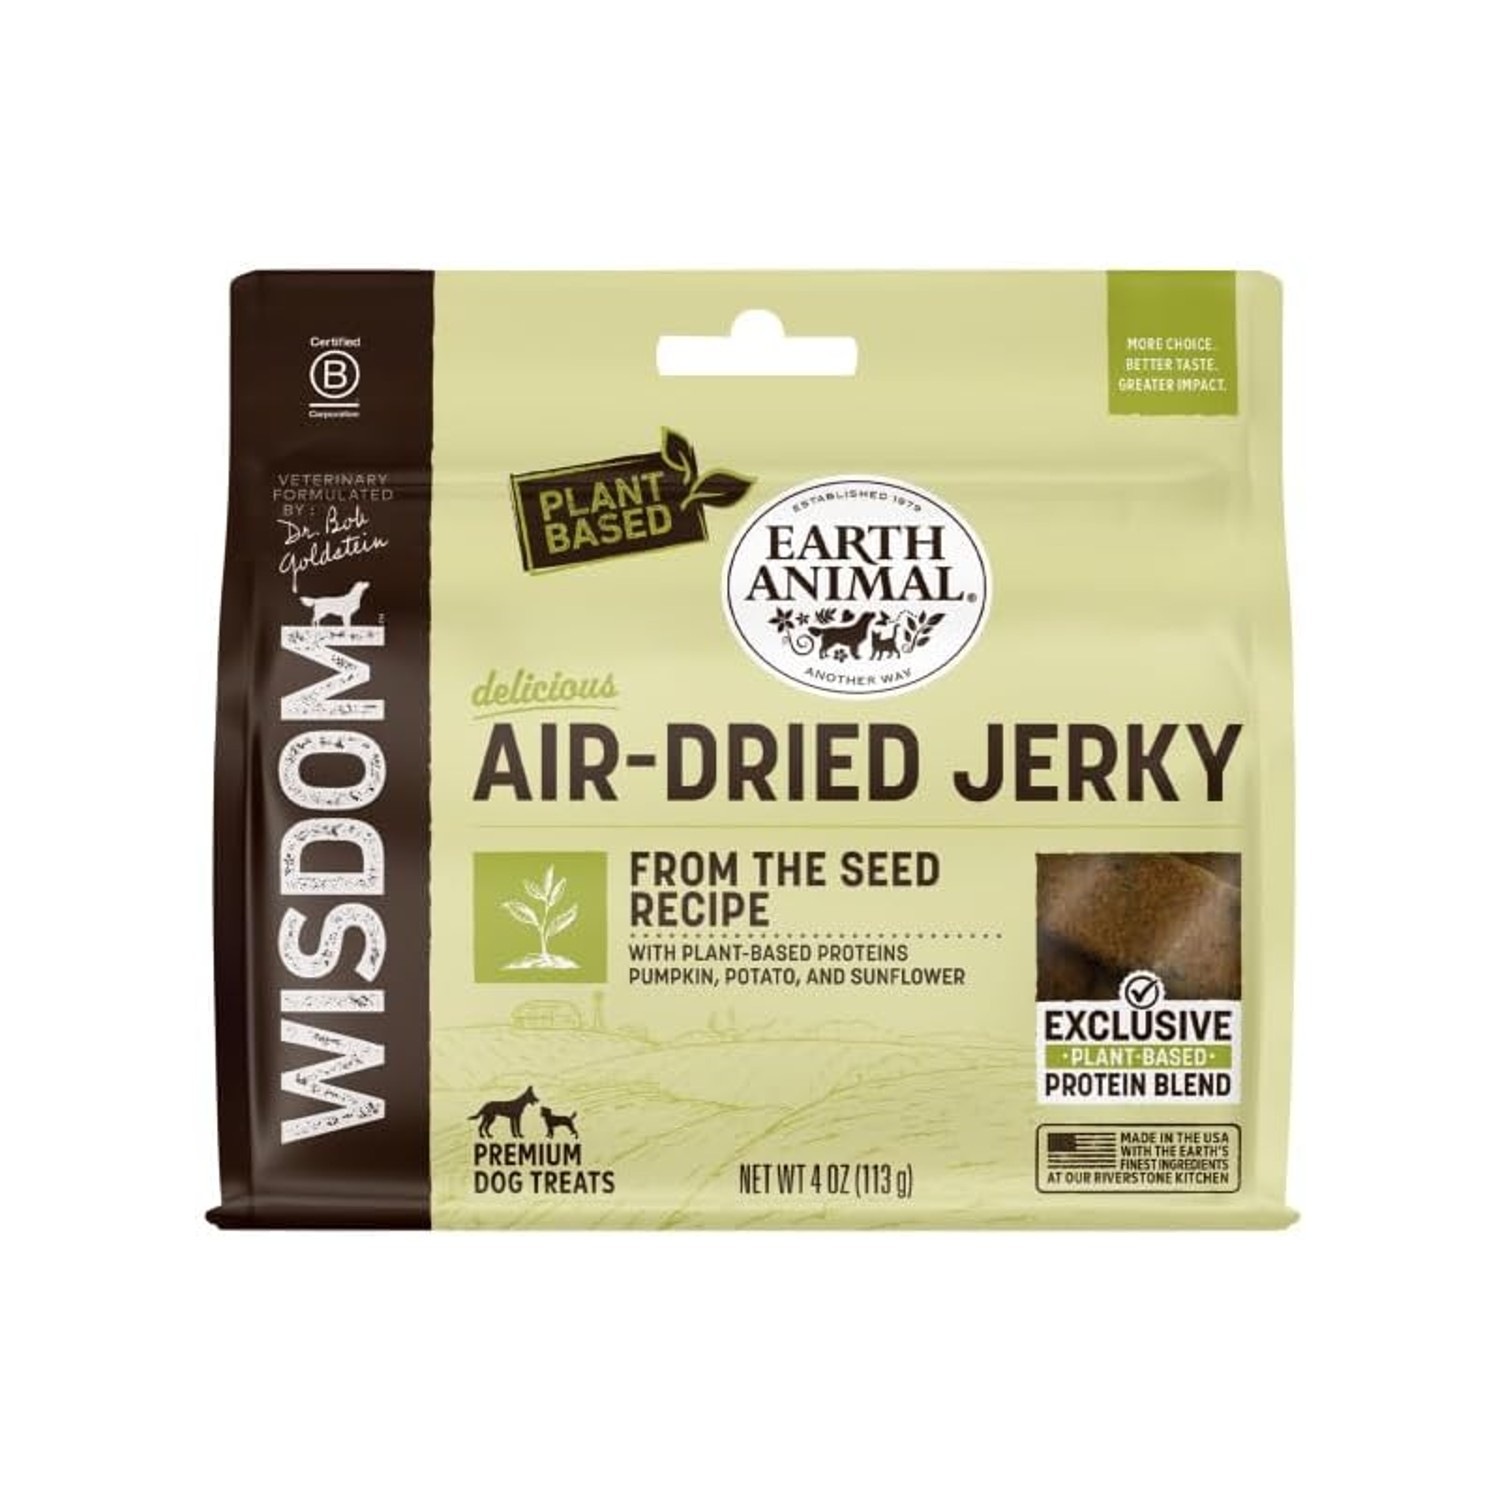 Earth Animal Wisdom Air-Dried Jerky Dog Treat - From the Seed